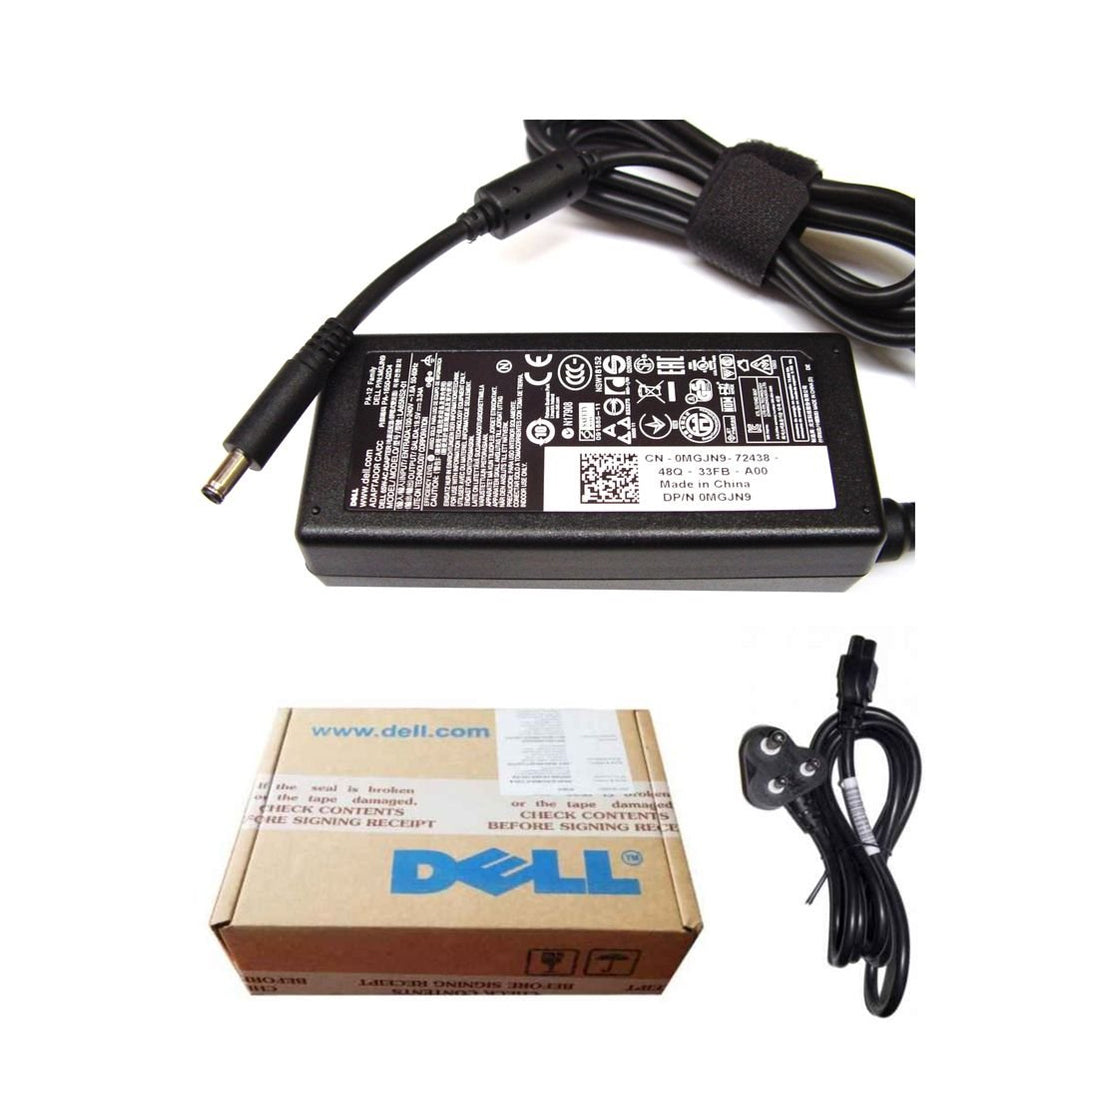 Dell Original 65W 19.5V 4.5mm Pin Laptop Charger Adapter for Inspiron 17 7773 With Power Cord